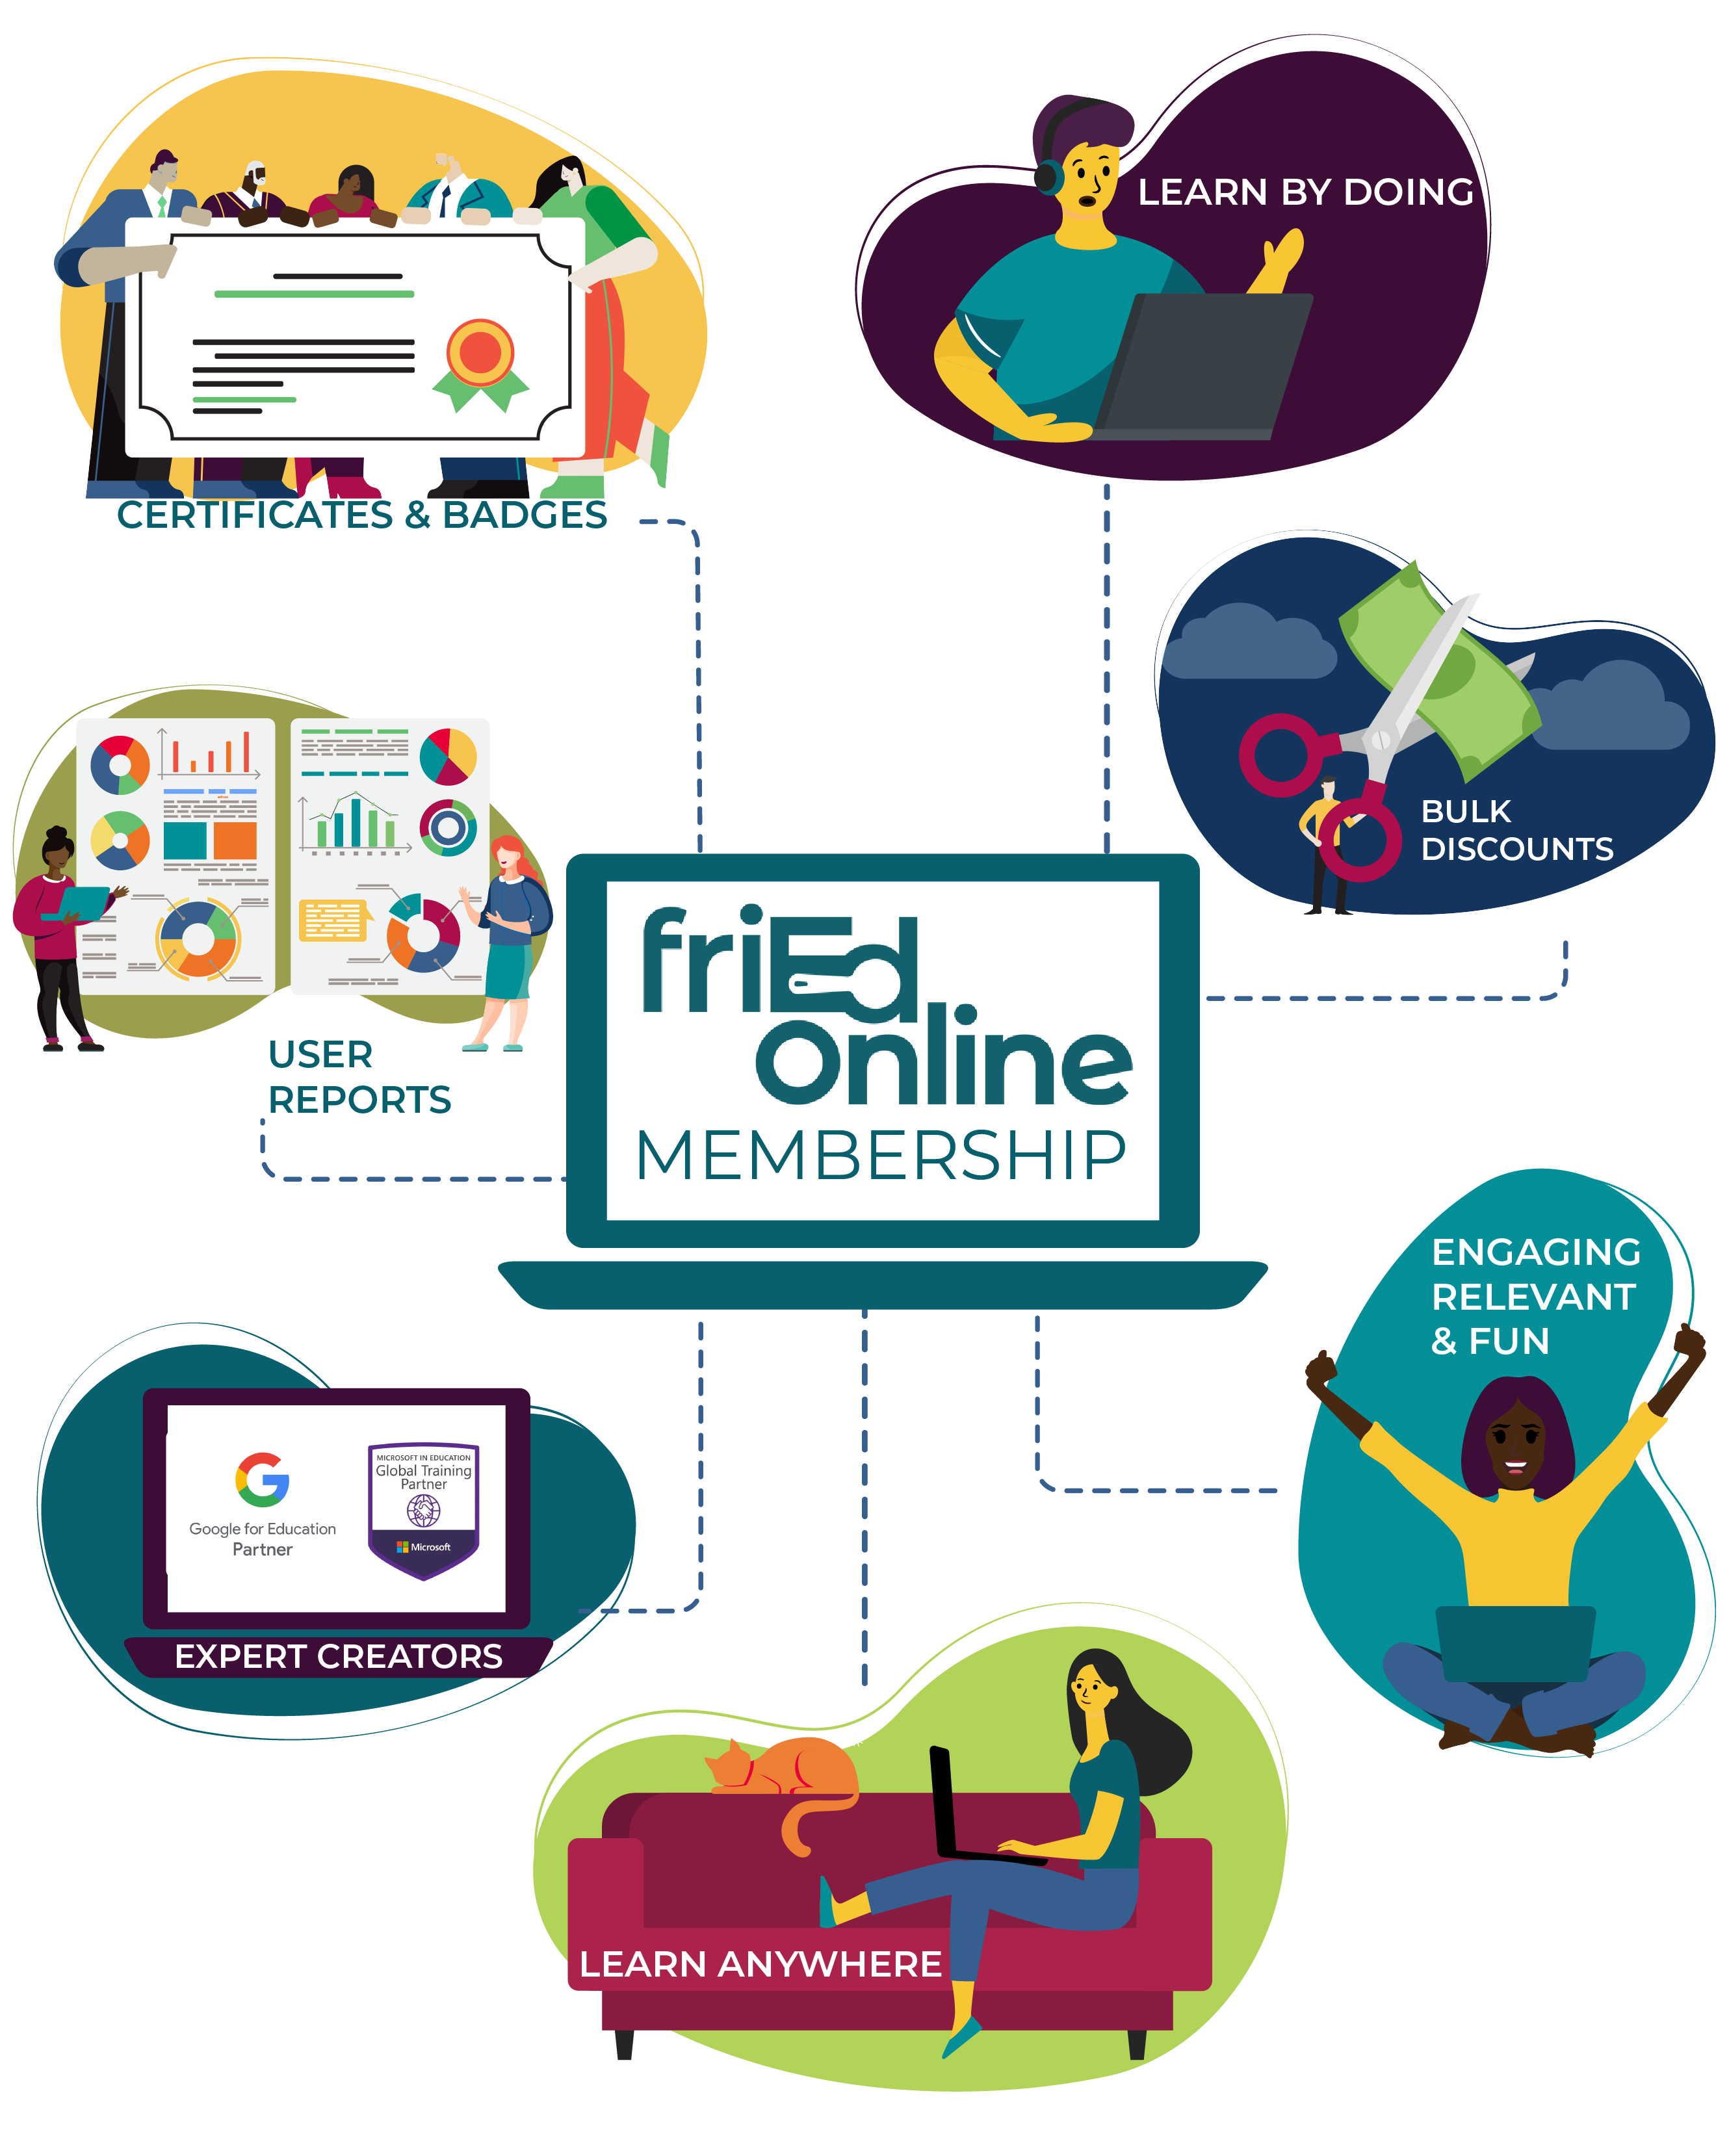 friedonline membership certicficates and badges, learn by doing, bulk discounts, engaging, relevant and fun, learn anywhere, expert creators, user reports